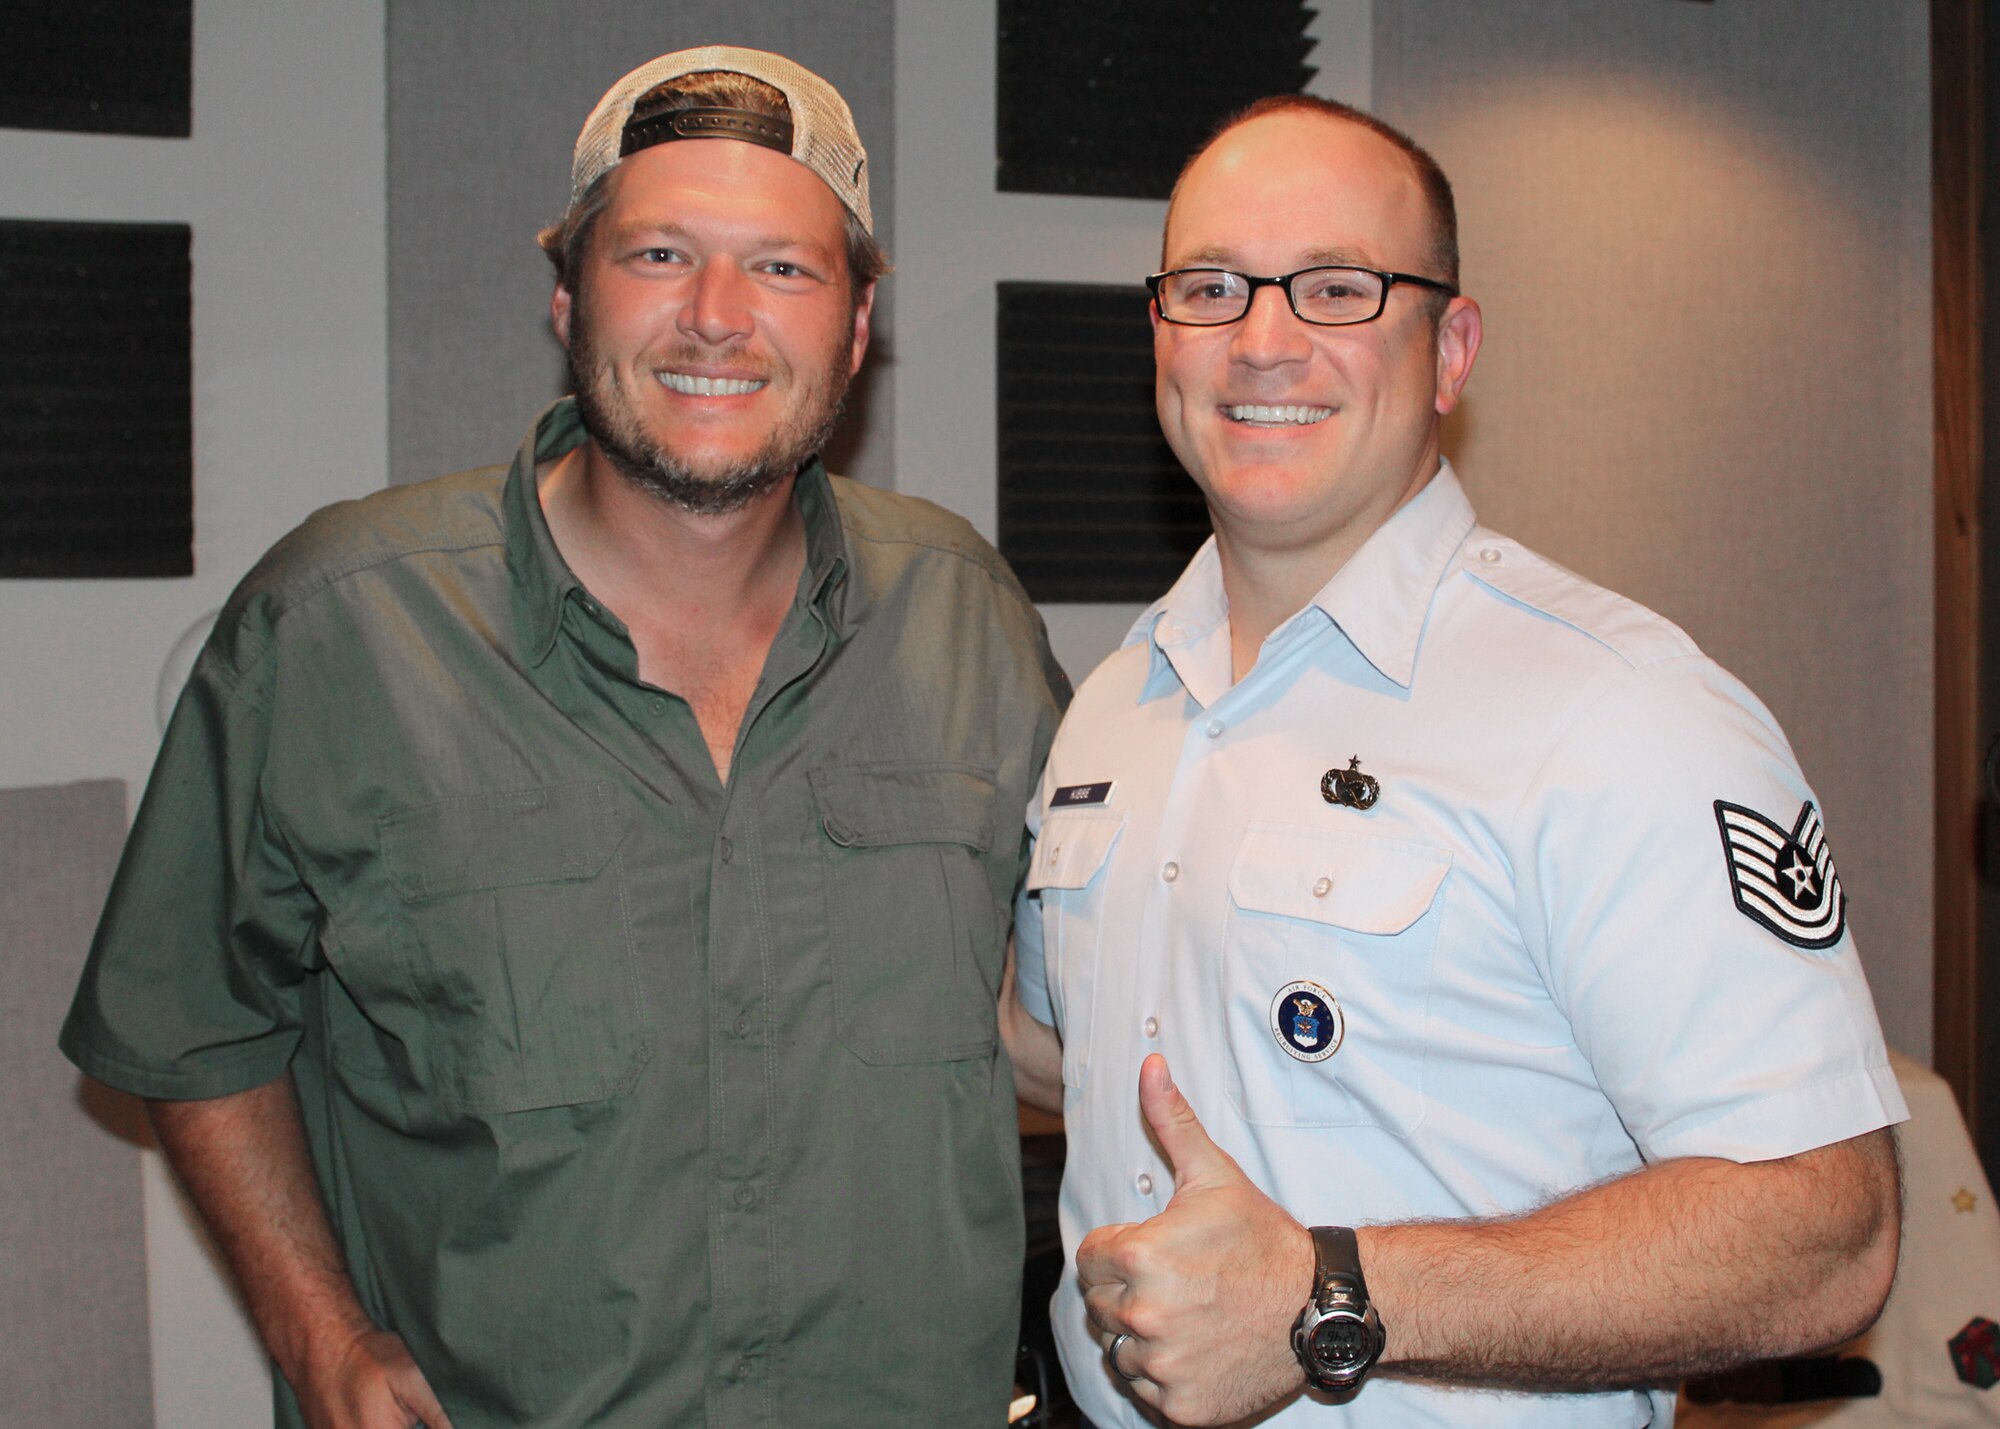 Tech. Sgt. Harry Kibbe gives a thumbs up after interviewing country supertar Blake Shelton for the 2013 "Red, White and Air Force Blue Christmas" radio special. The one-hour program, recorded at Spotland Productions in Nashville, will be sent to more than 2,000 country radio stations in the United States and the Armed Forces Network for airing during the upcoming holiday season. Air Force Recruiting Service produces the annual holiday special. (U.S. Air Force photo/Dale Eckroth)
